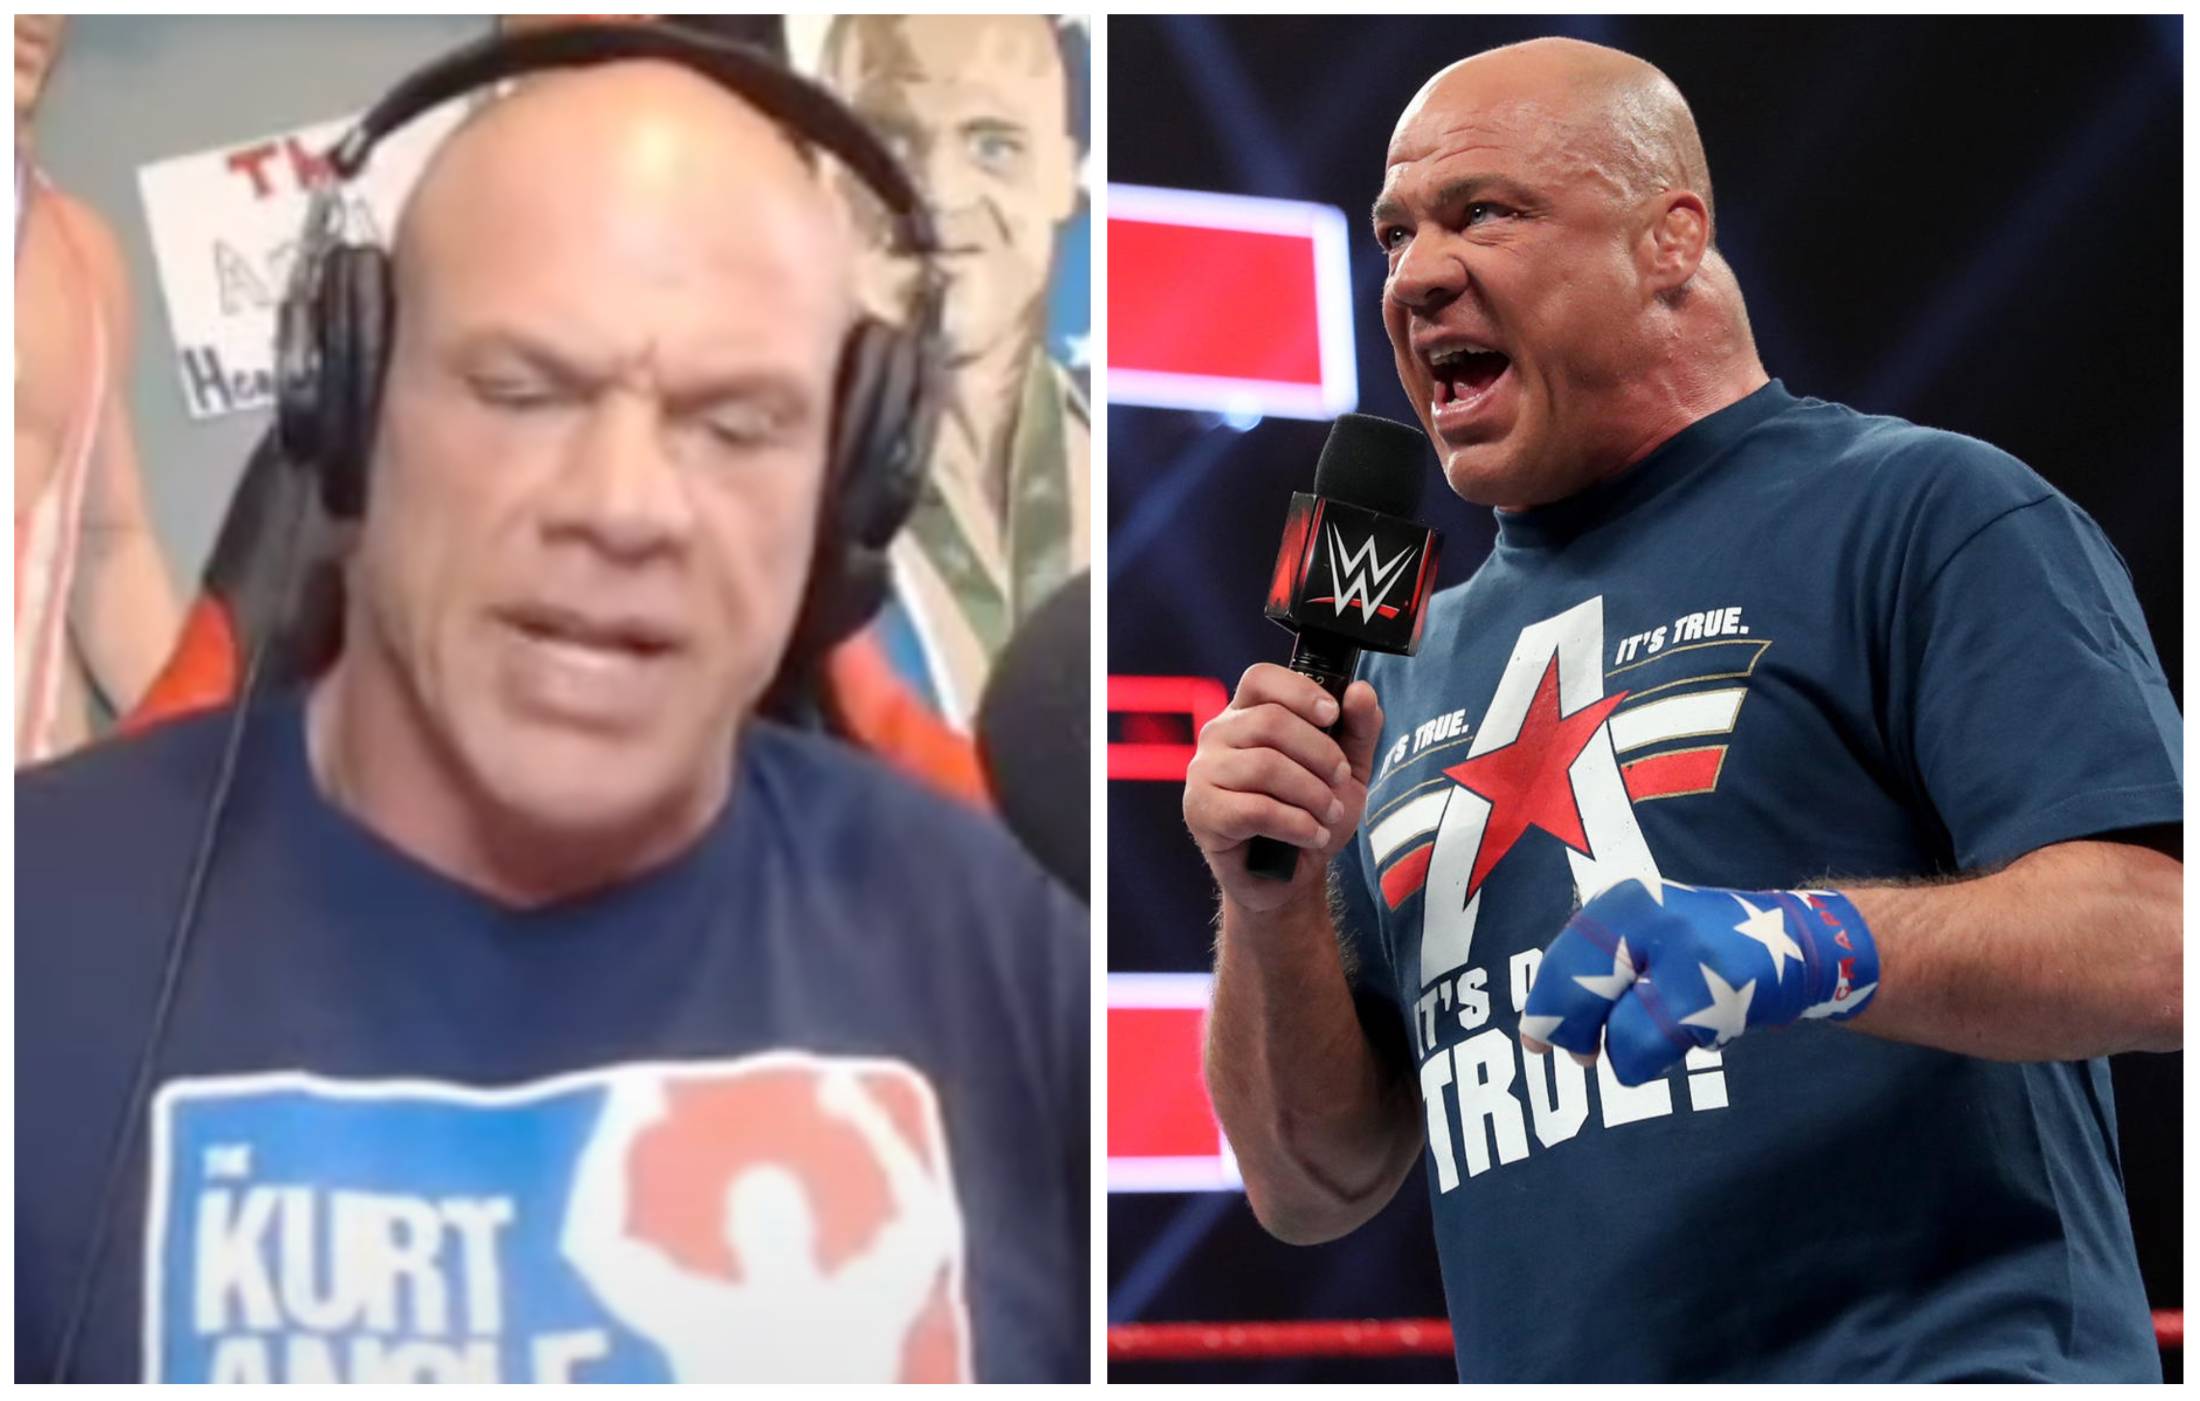 Kurt Angle is dealing with brain issues right now